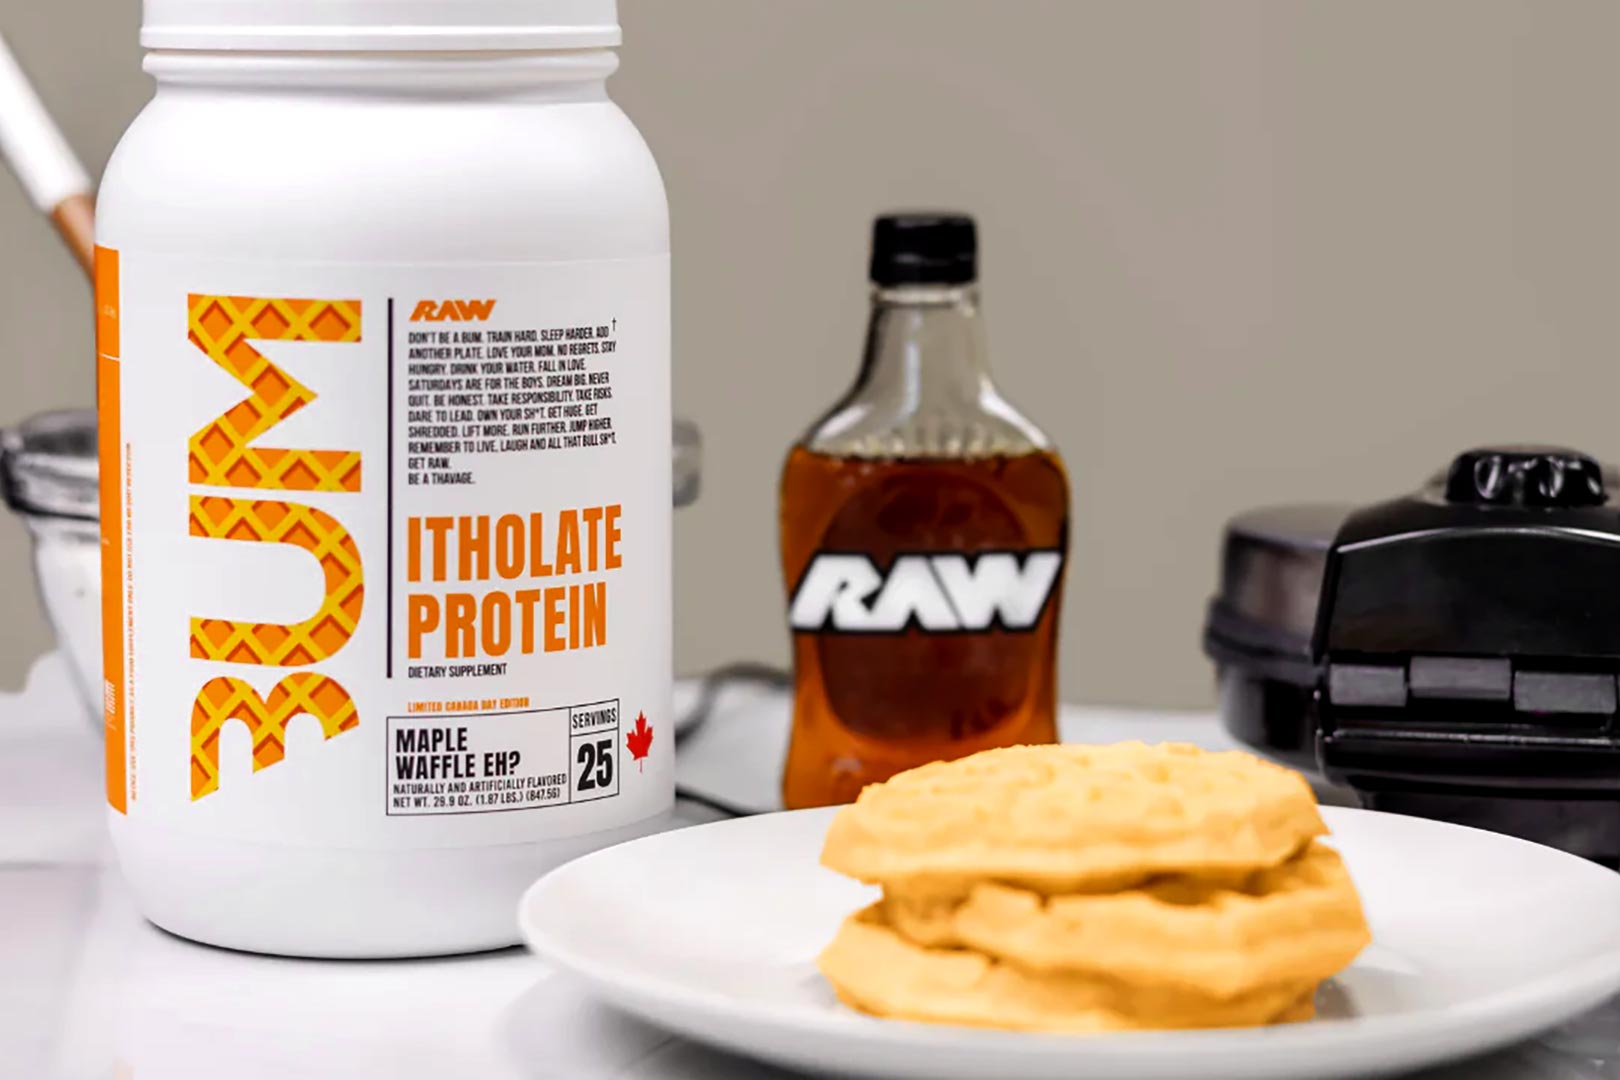 Raw Nutrition Maple Waffle Eh Itholate Protein